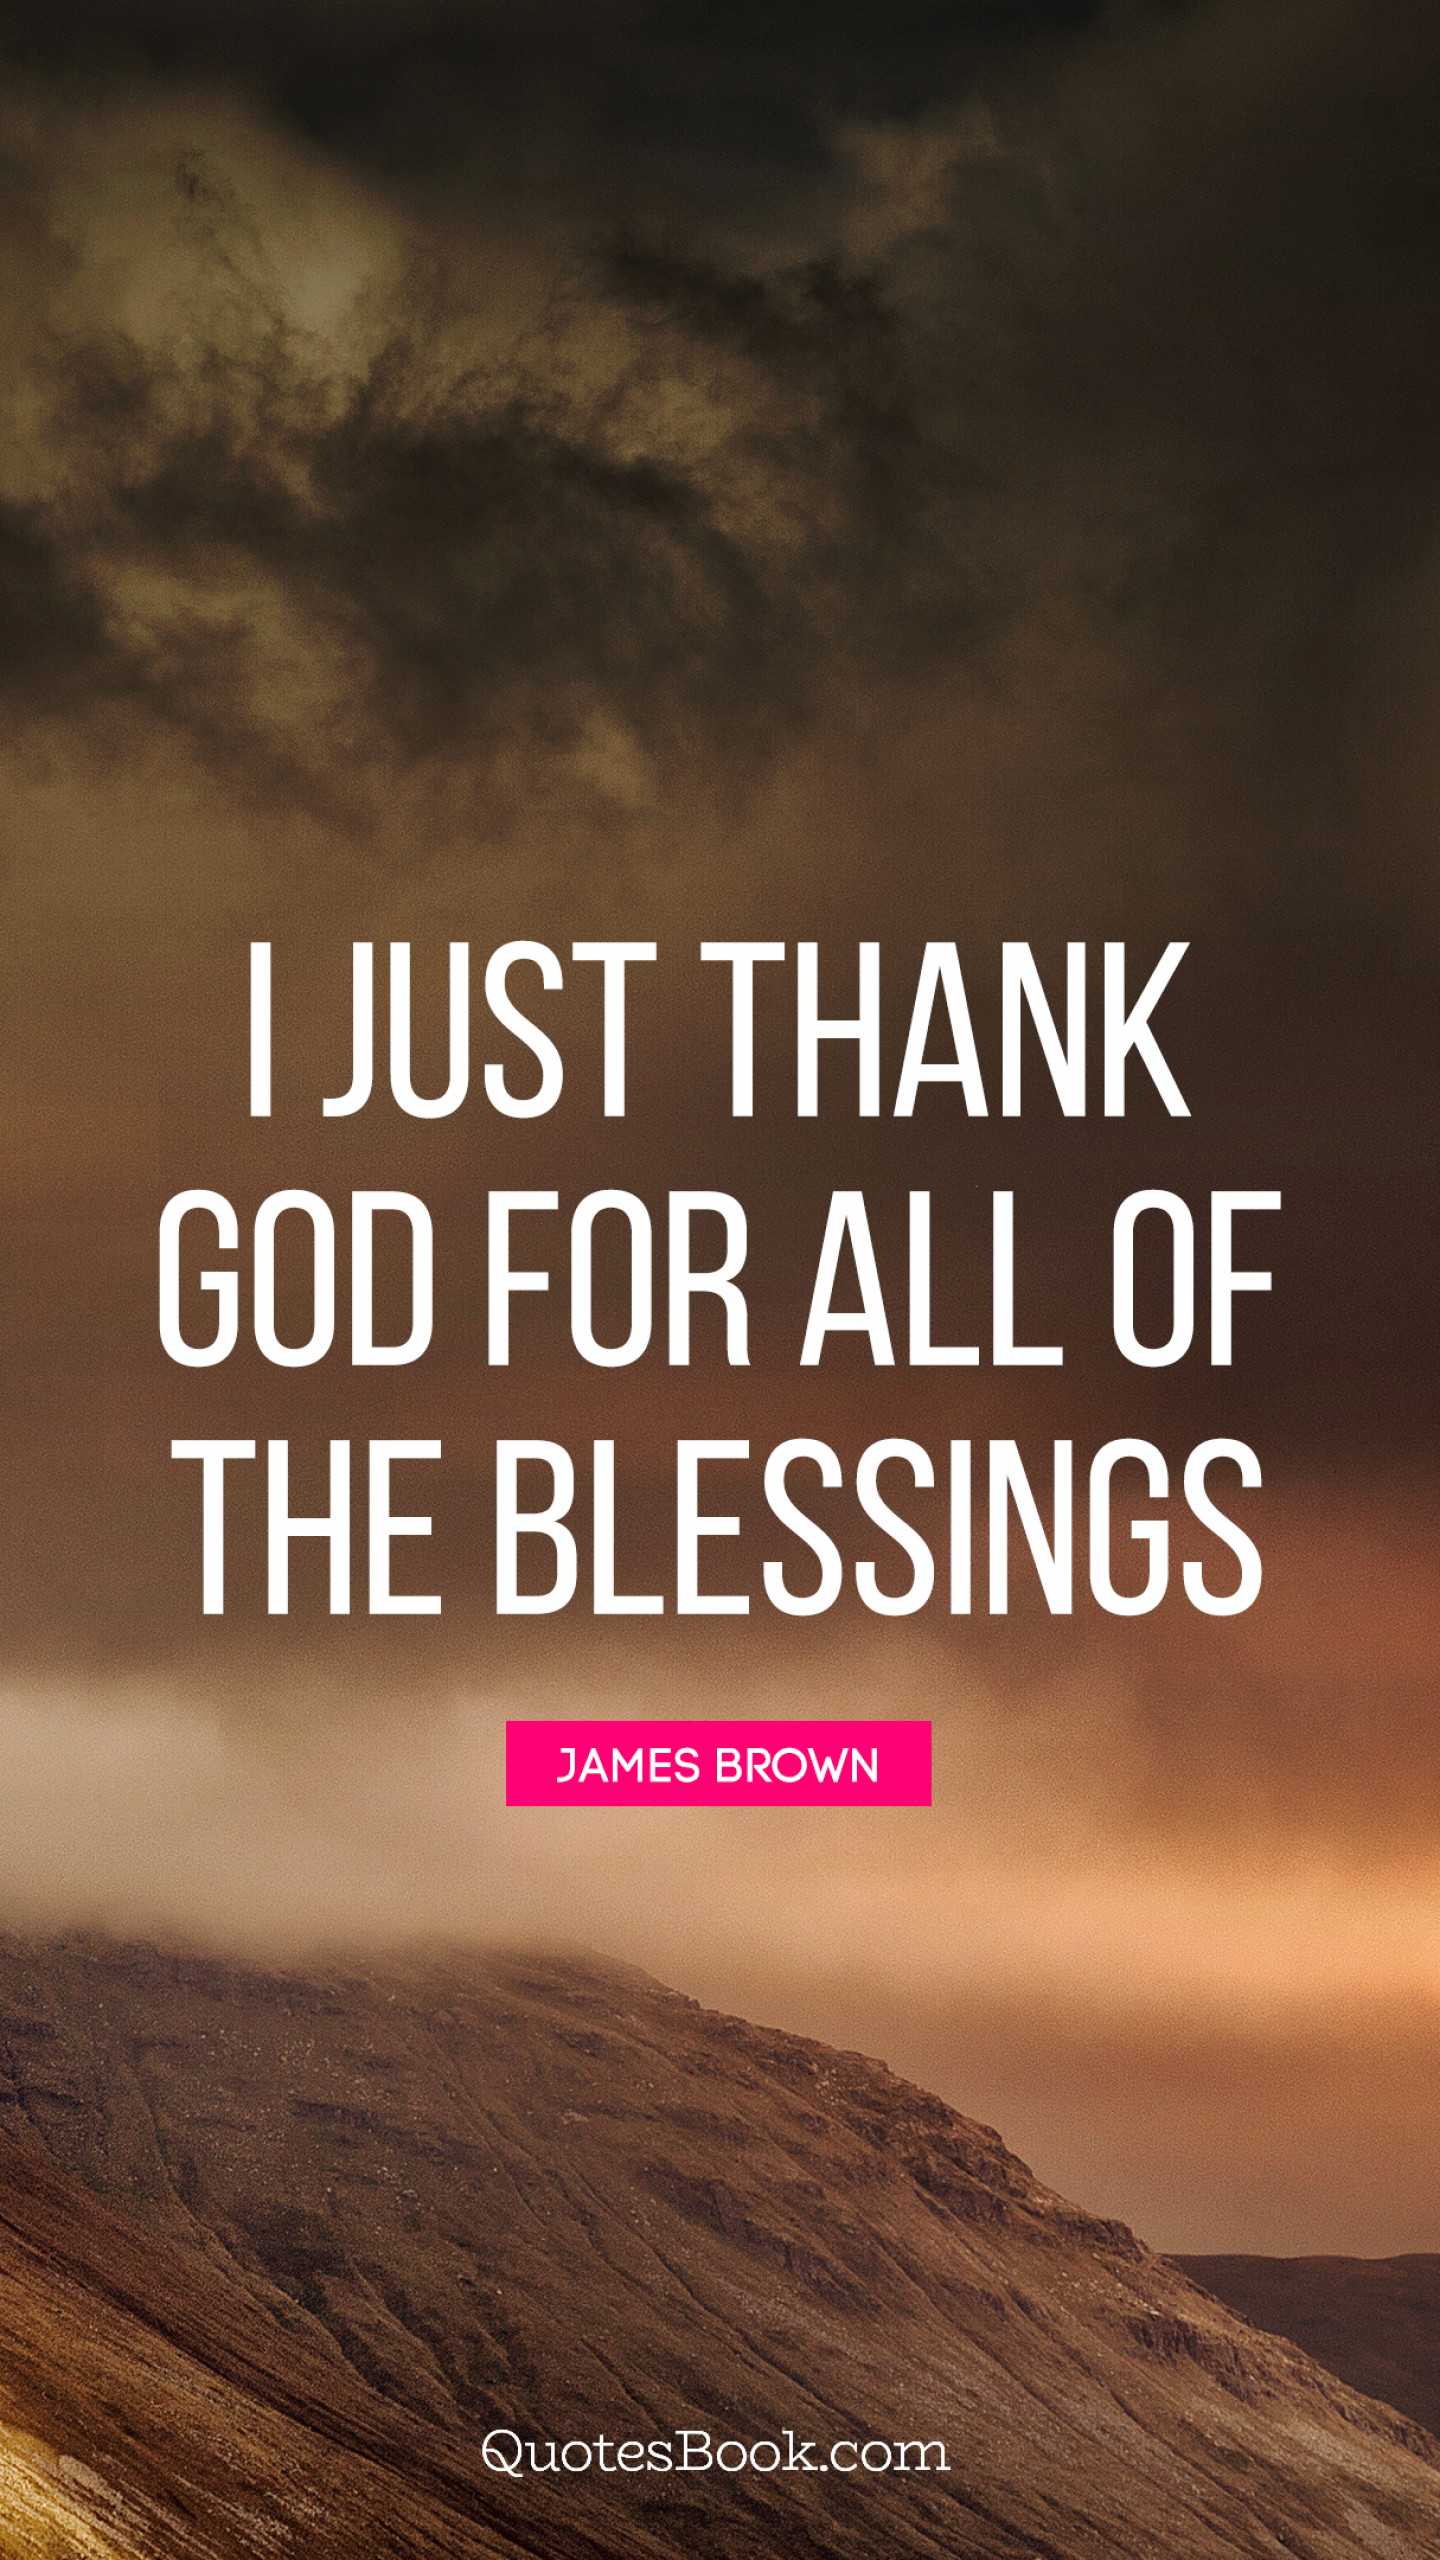 Quotes For Thanks God I just thank God for all of the blessings. - Quote by James Brown -  QuotesBook